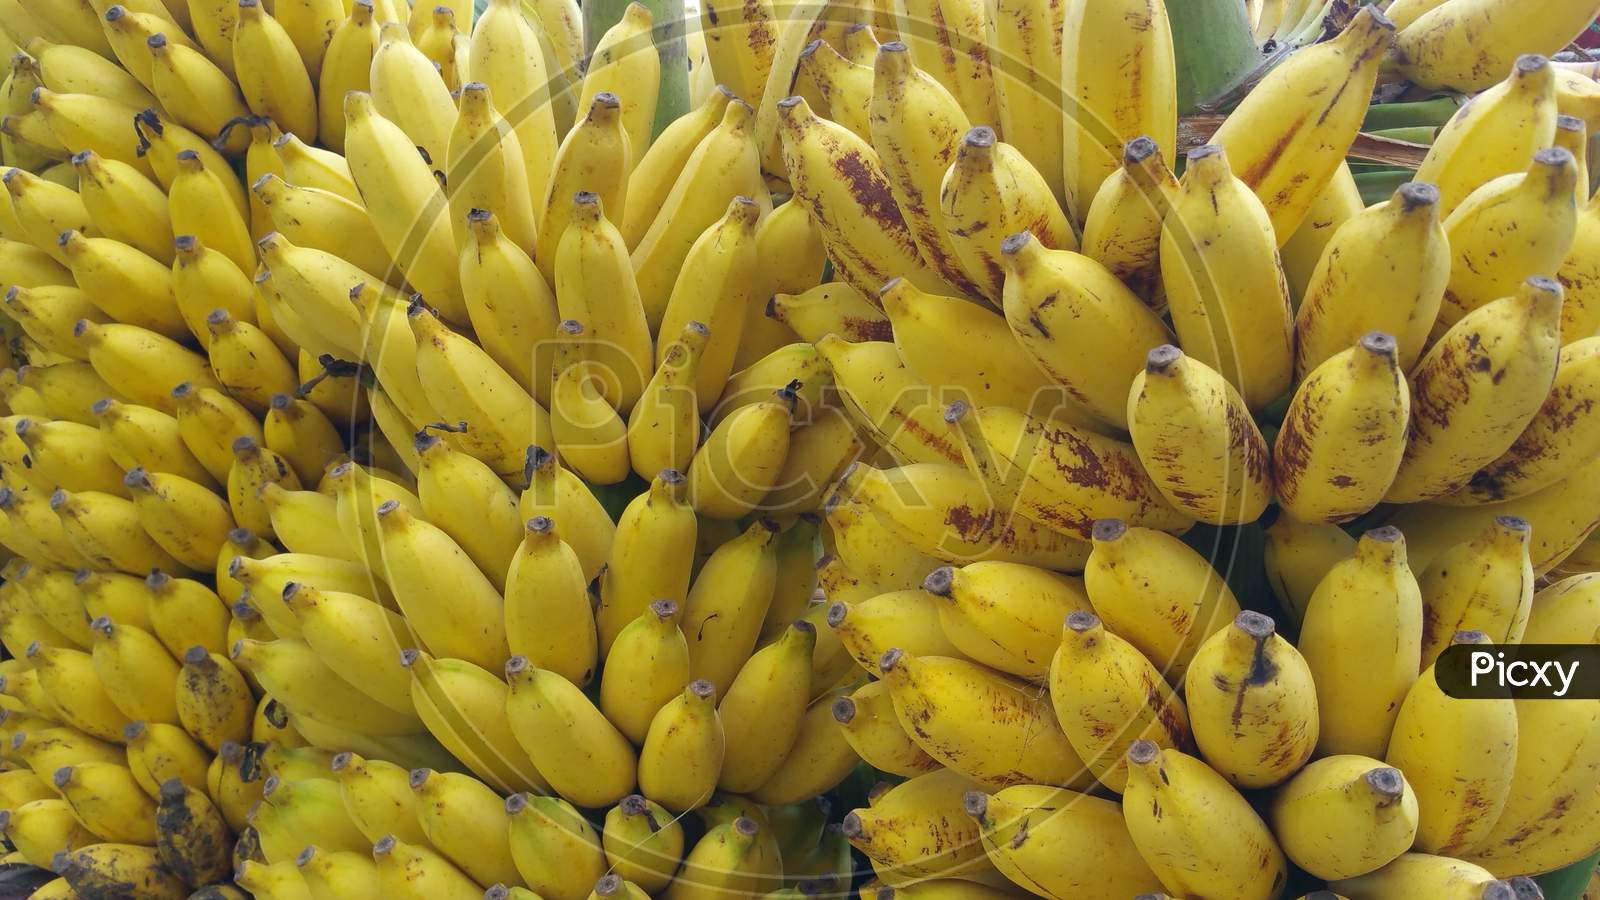 Close up pic of yellow bananas in a market